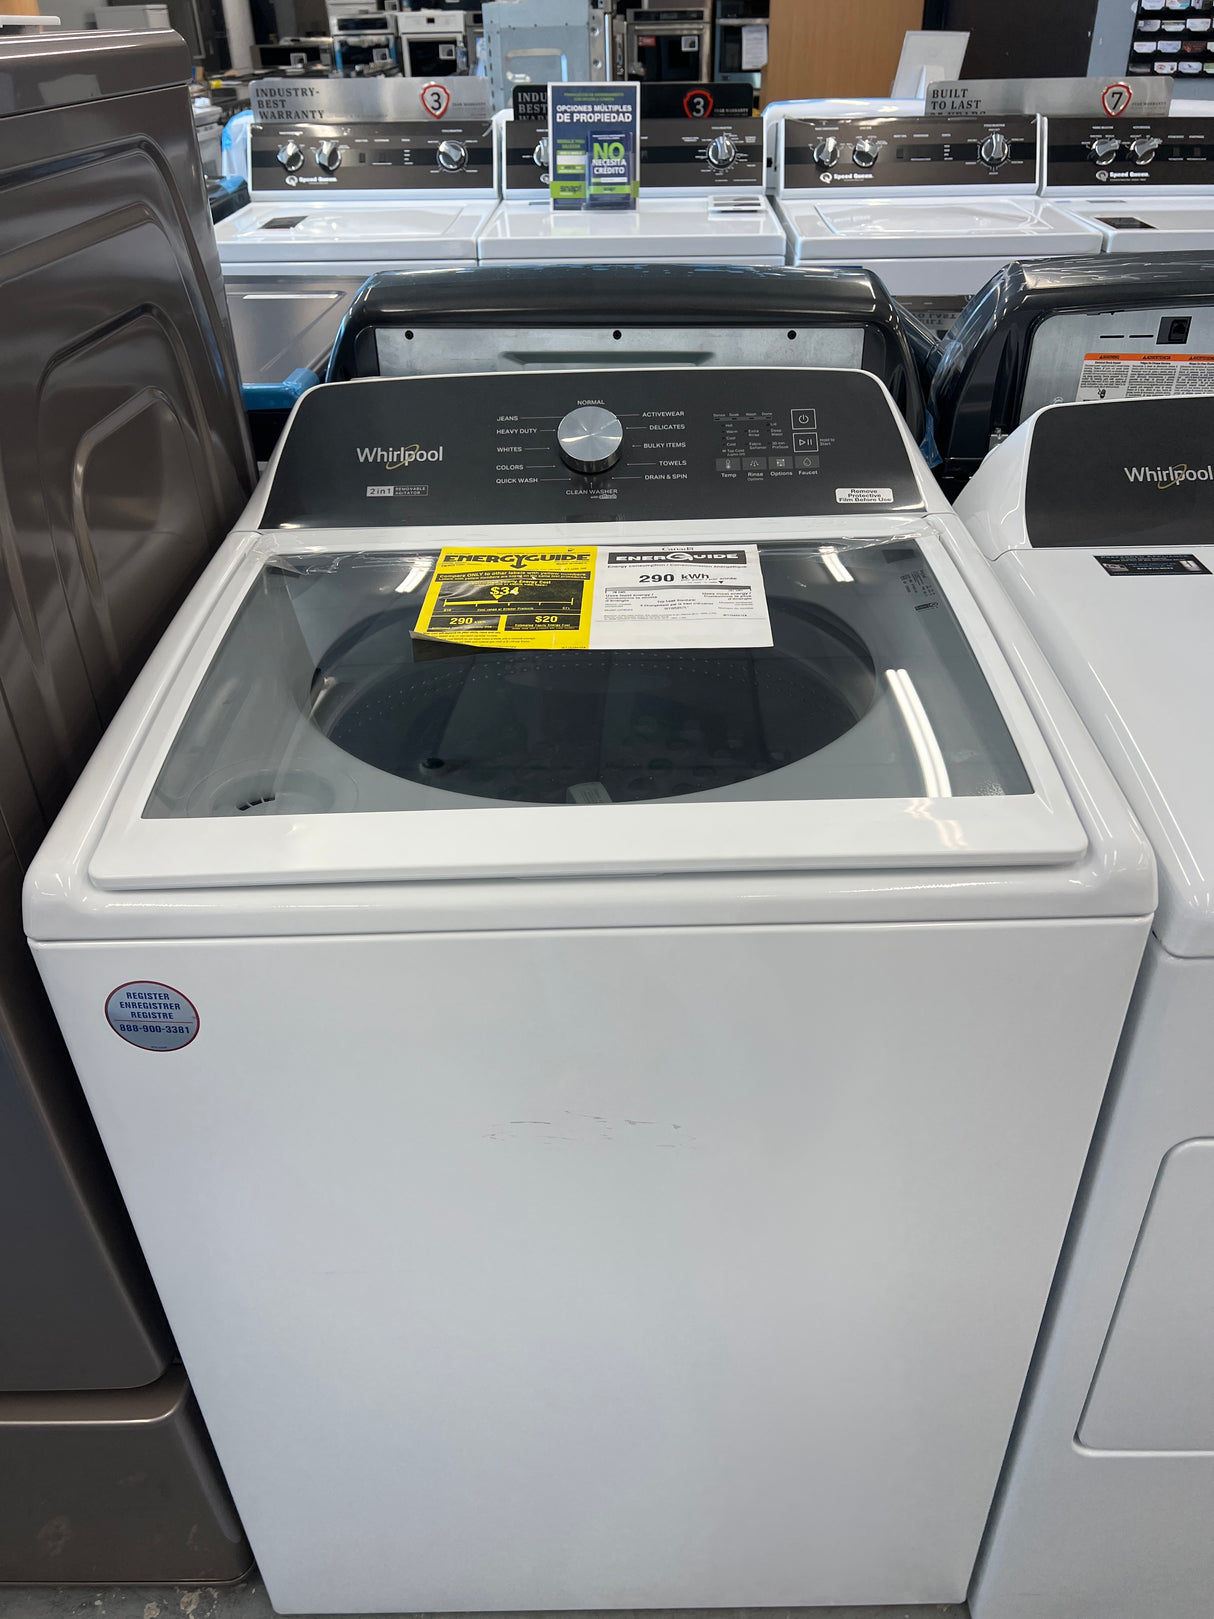 WTW5057LW whirlpool, 4.7 ft.³ white top load